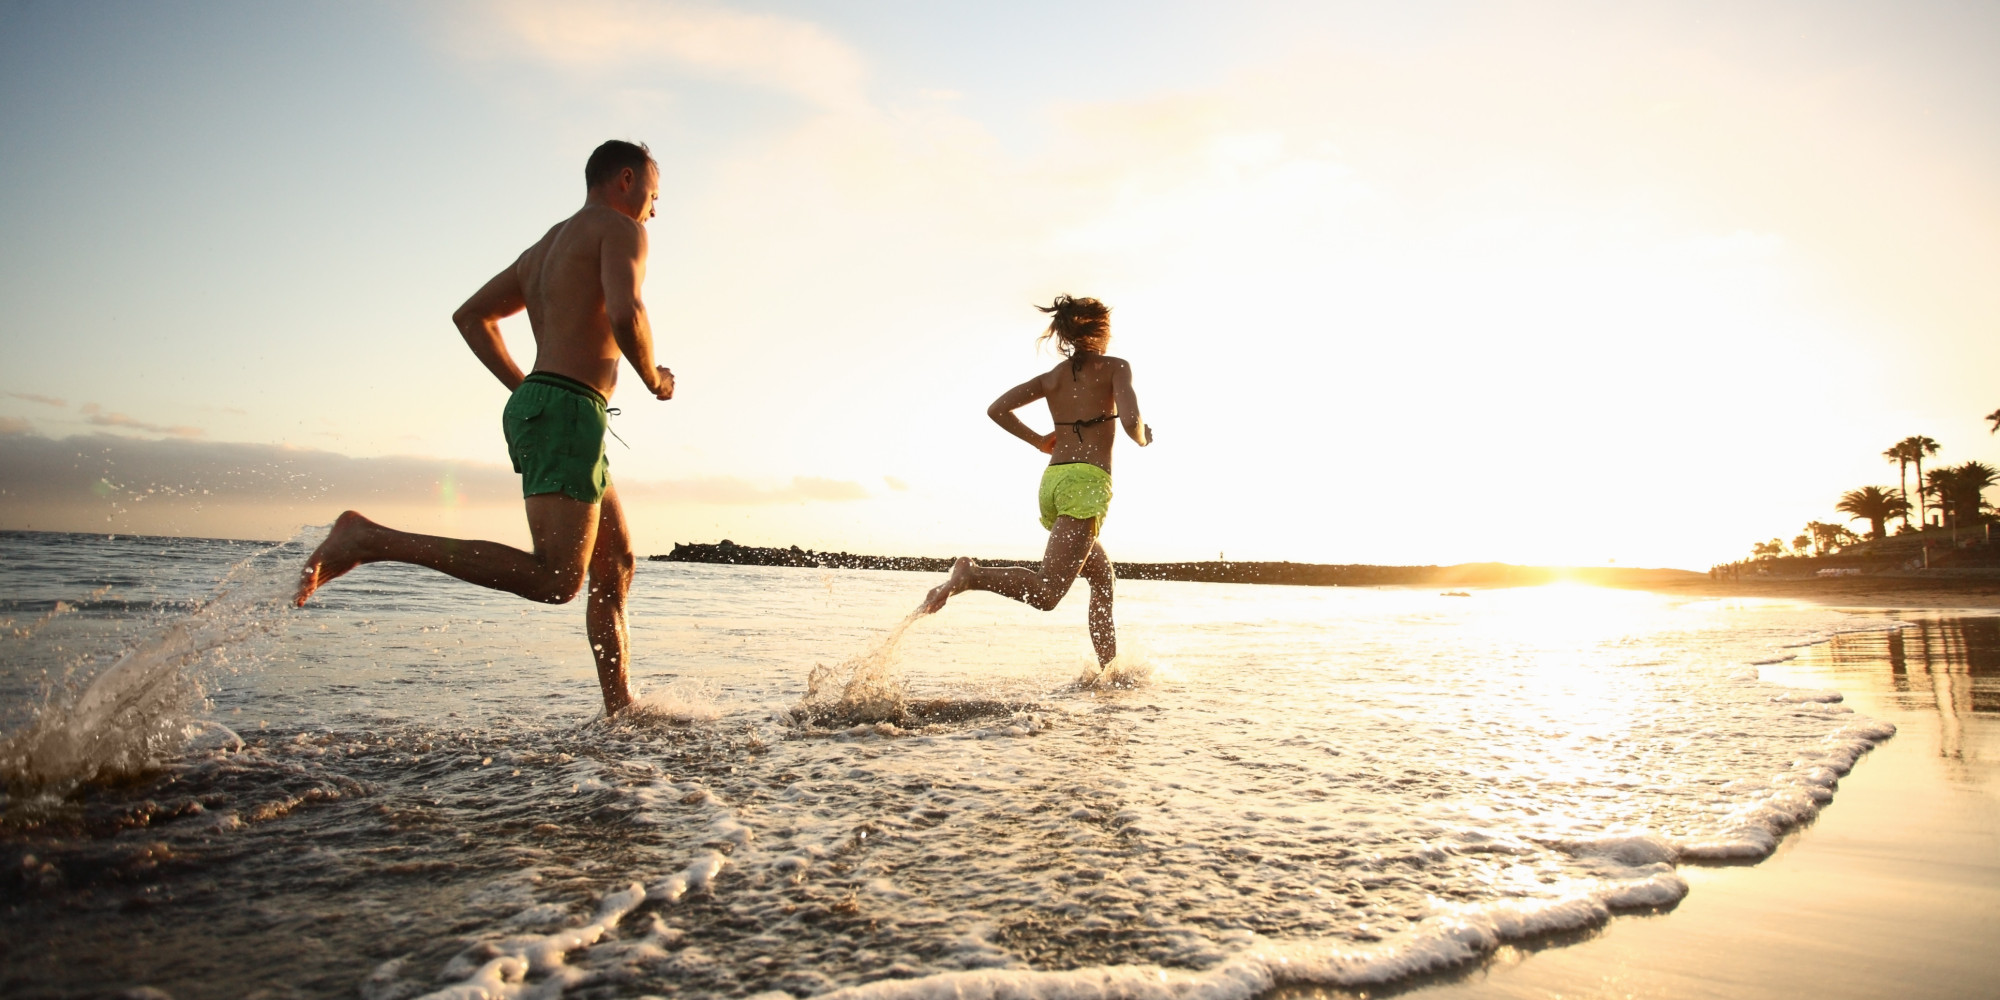 Man and woman running on beach at sunset